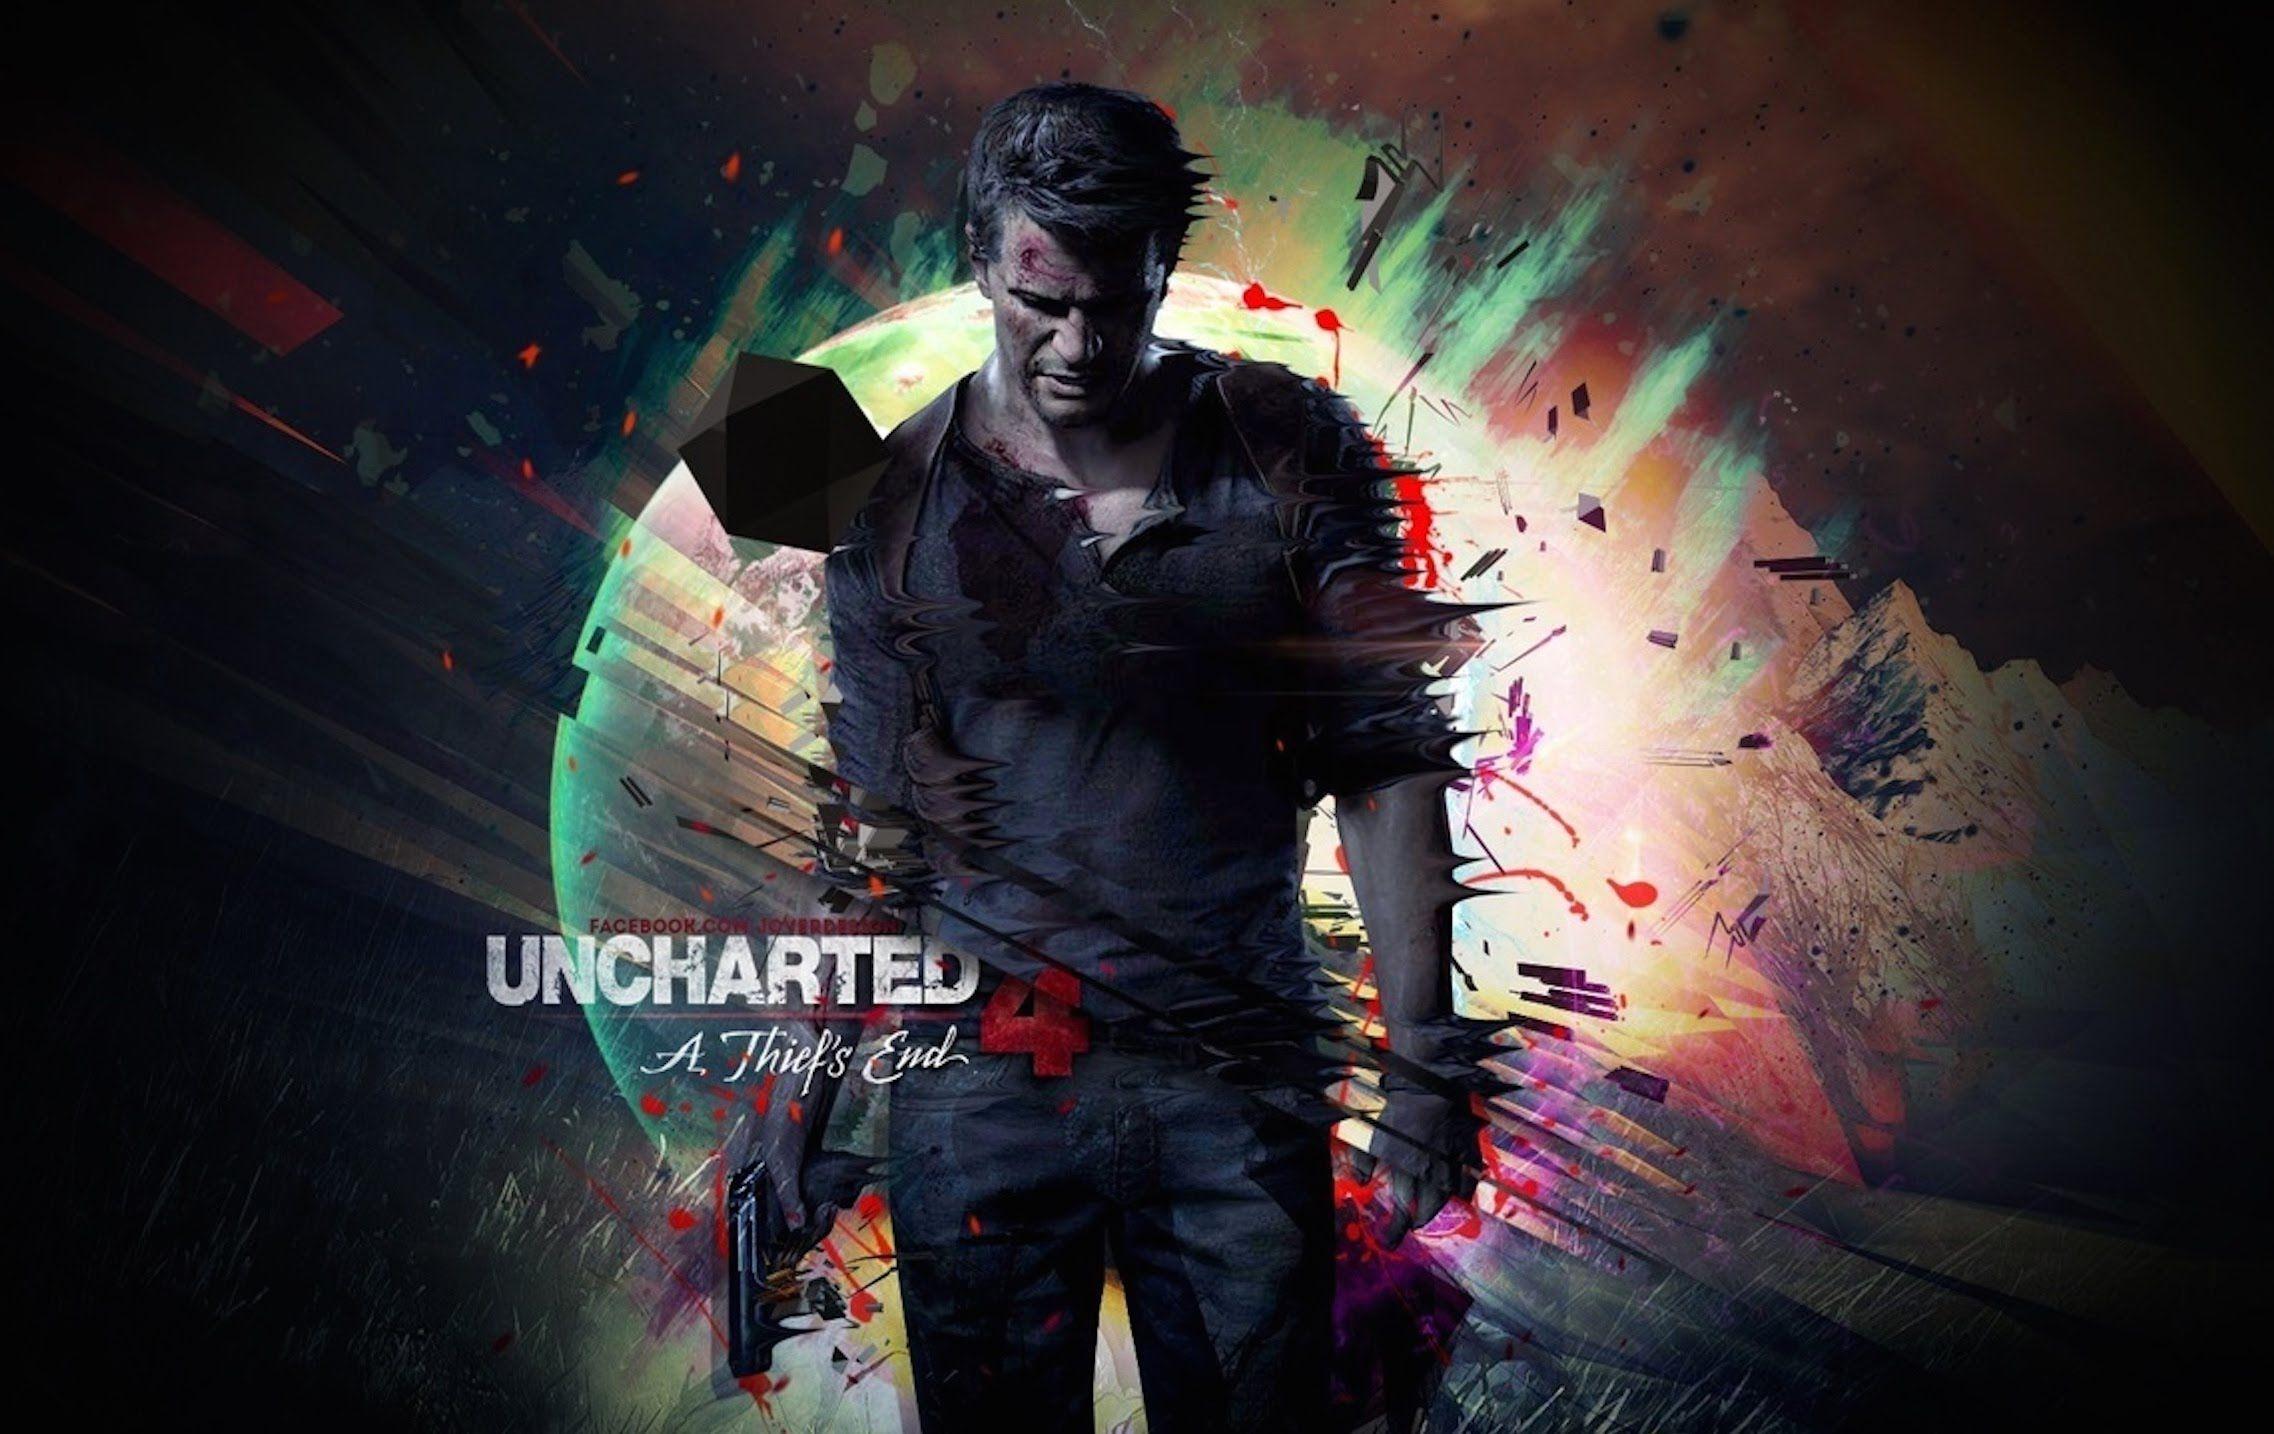 Uncharted 4: A Thief's End HD Wallpaper and screens download free